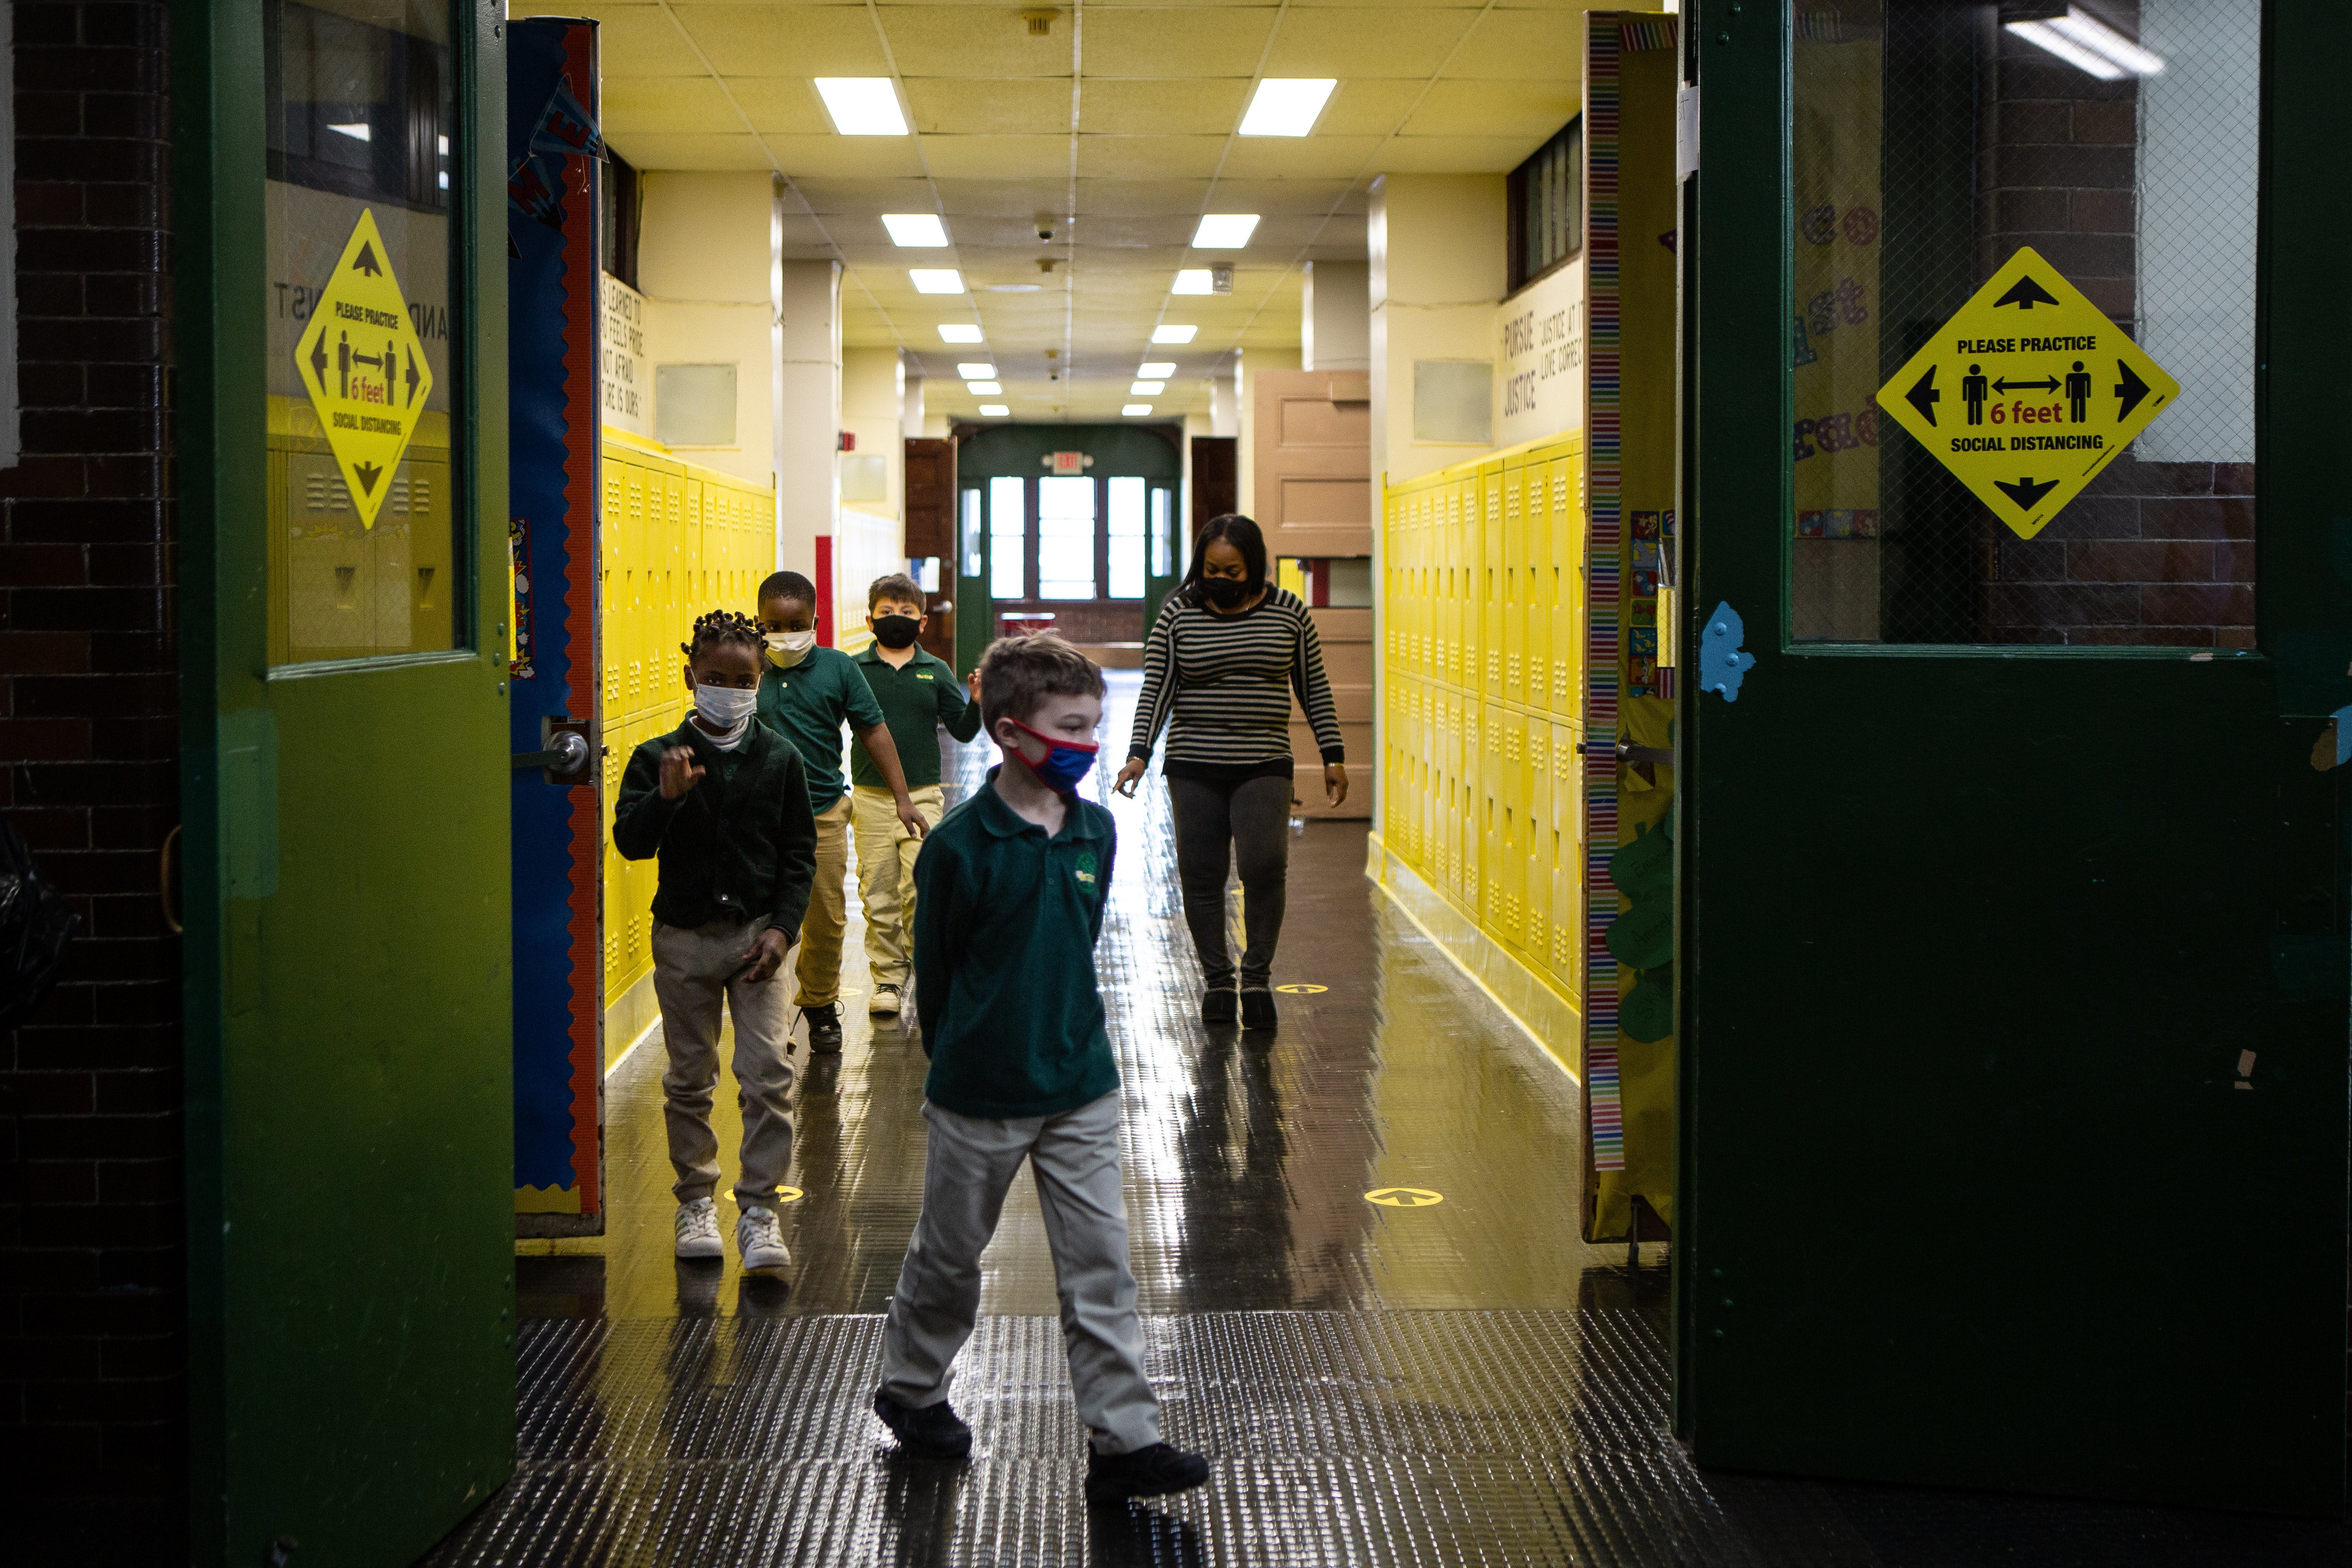 Students walk through the hall at Roseville Community Charter school in Newark, N.J.